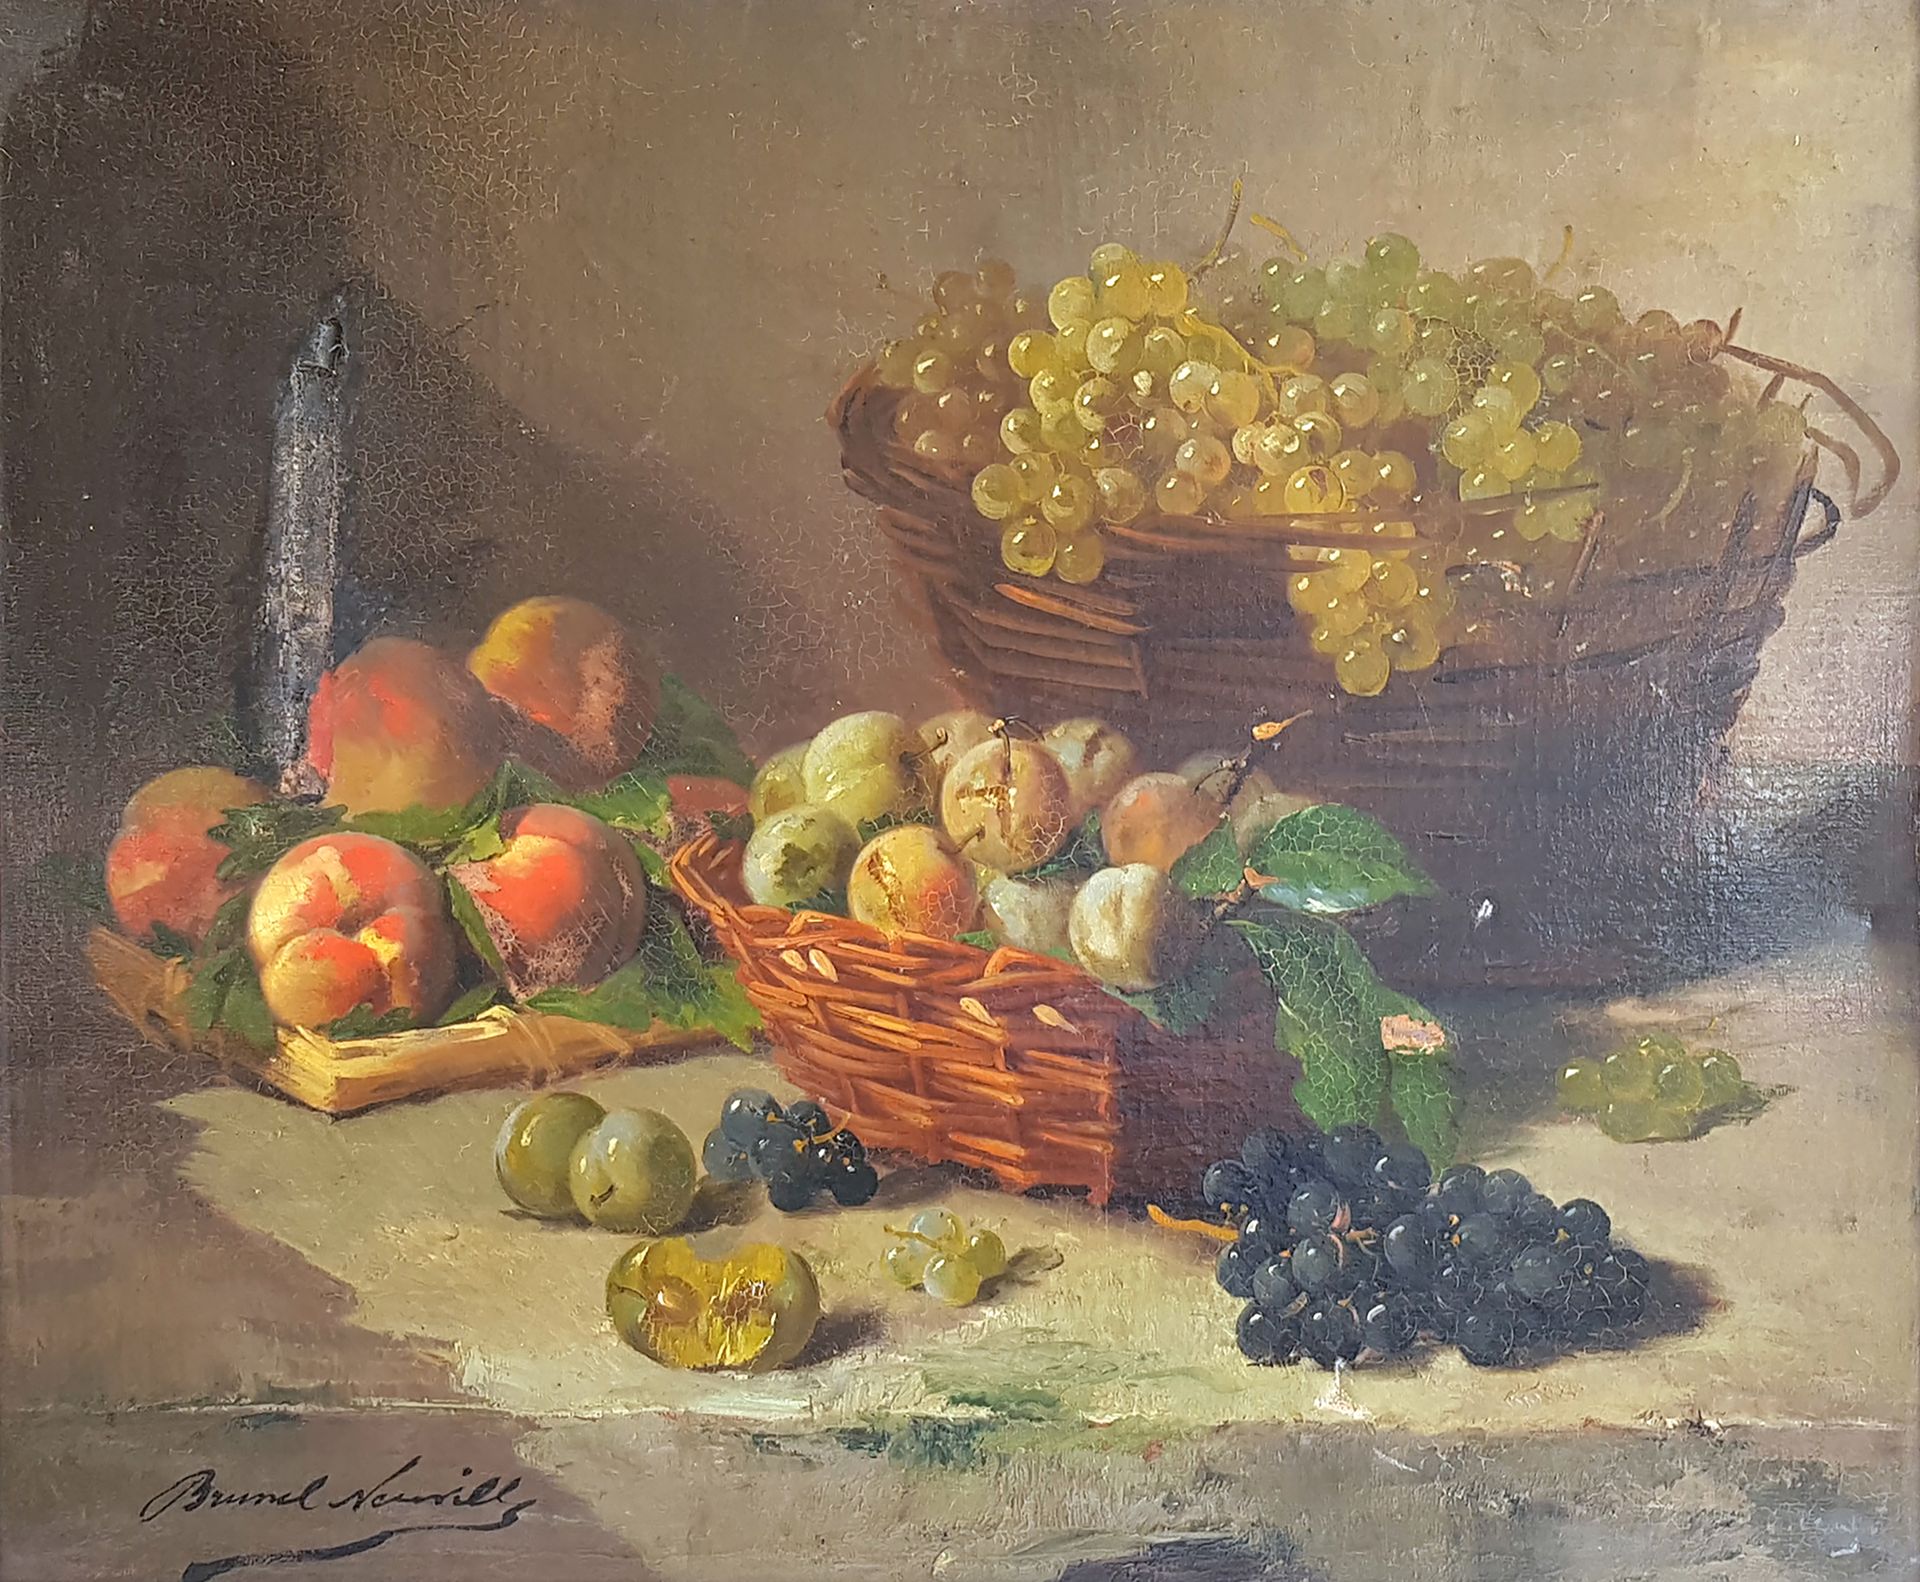 Null Alfred BRUNEL de NEUVILLE (1852-1941)

Still life with fruits

Oil on canva&hellip;